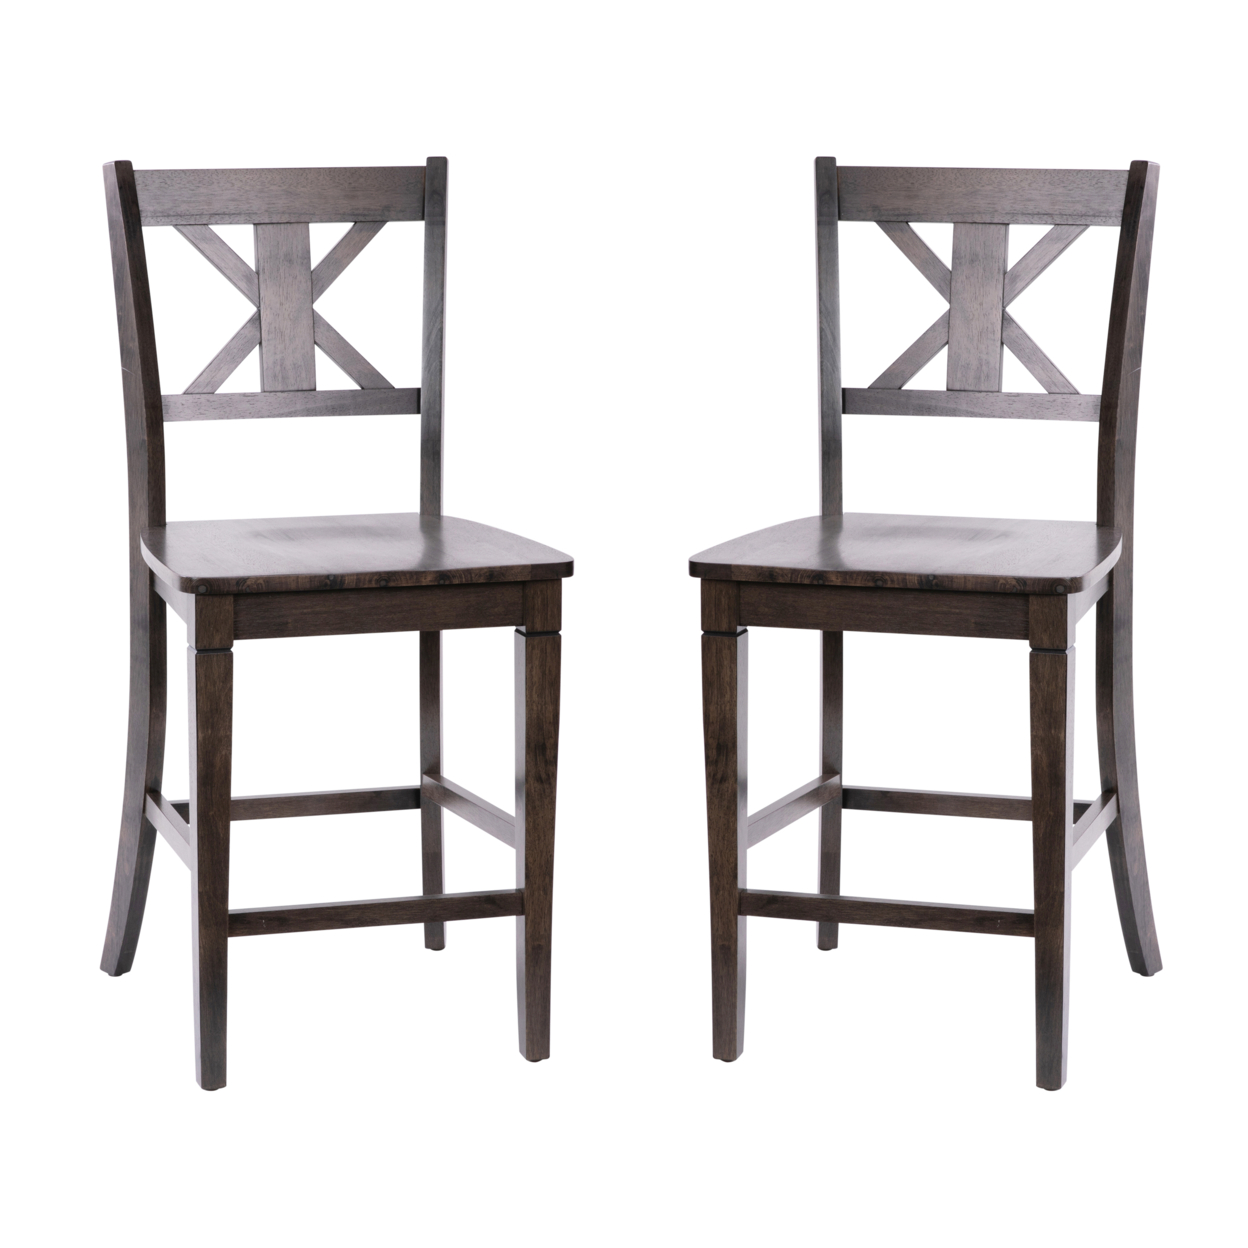 2 Piece Counter Stools, X Design Wood Back, Washed Gray